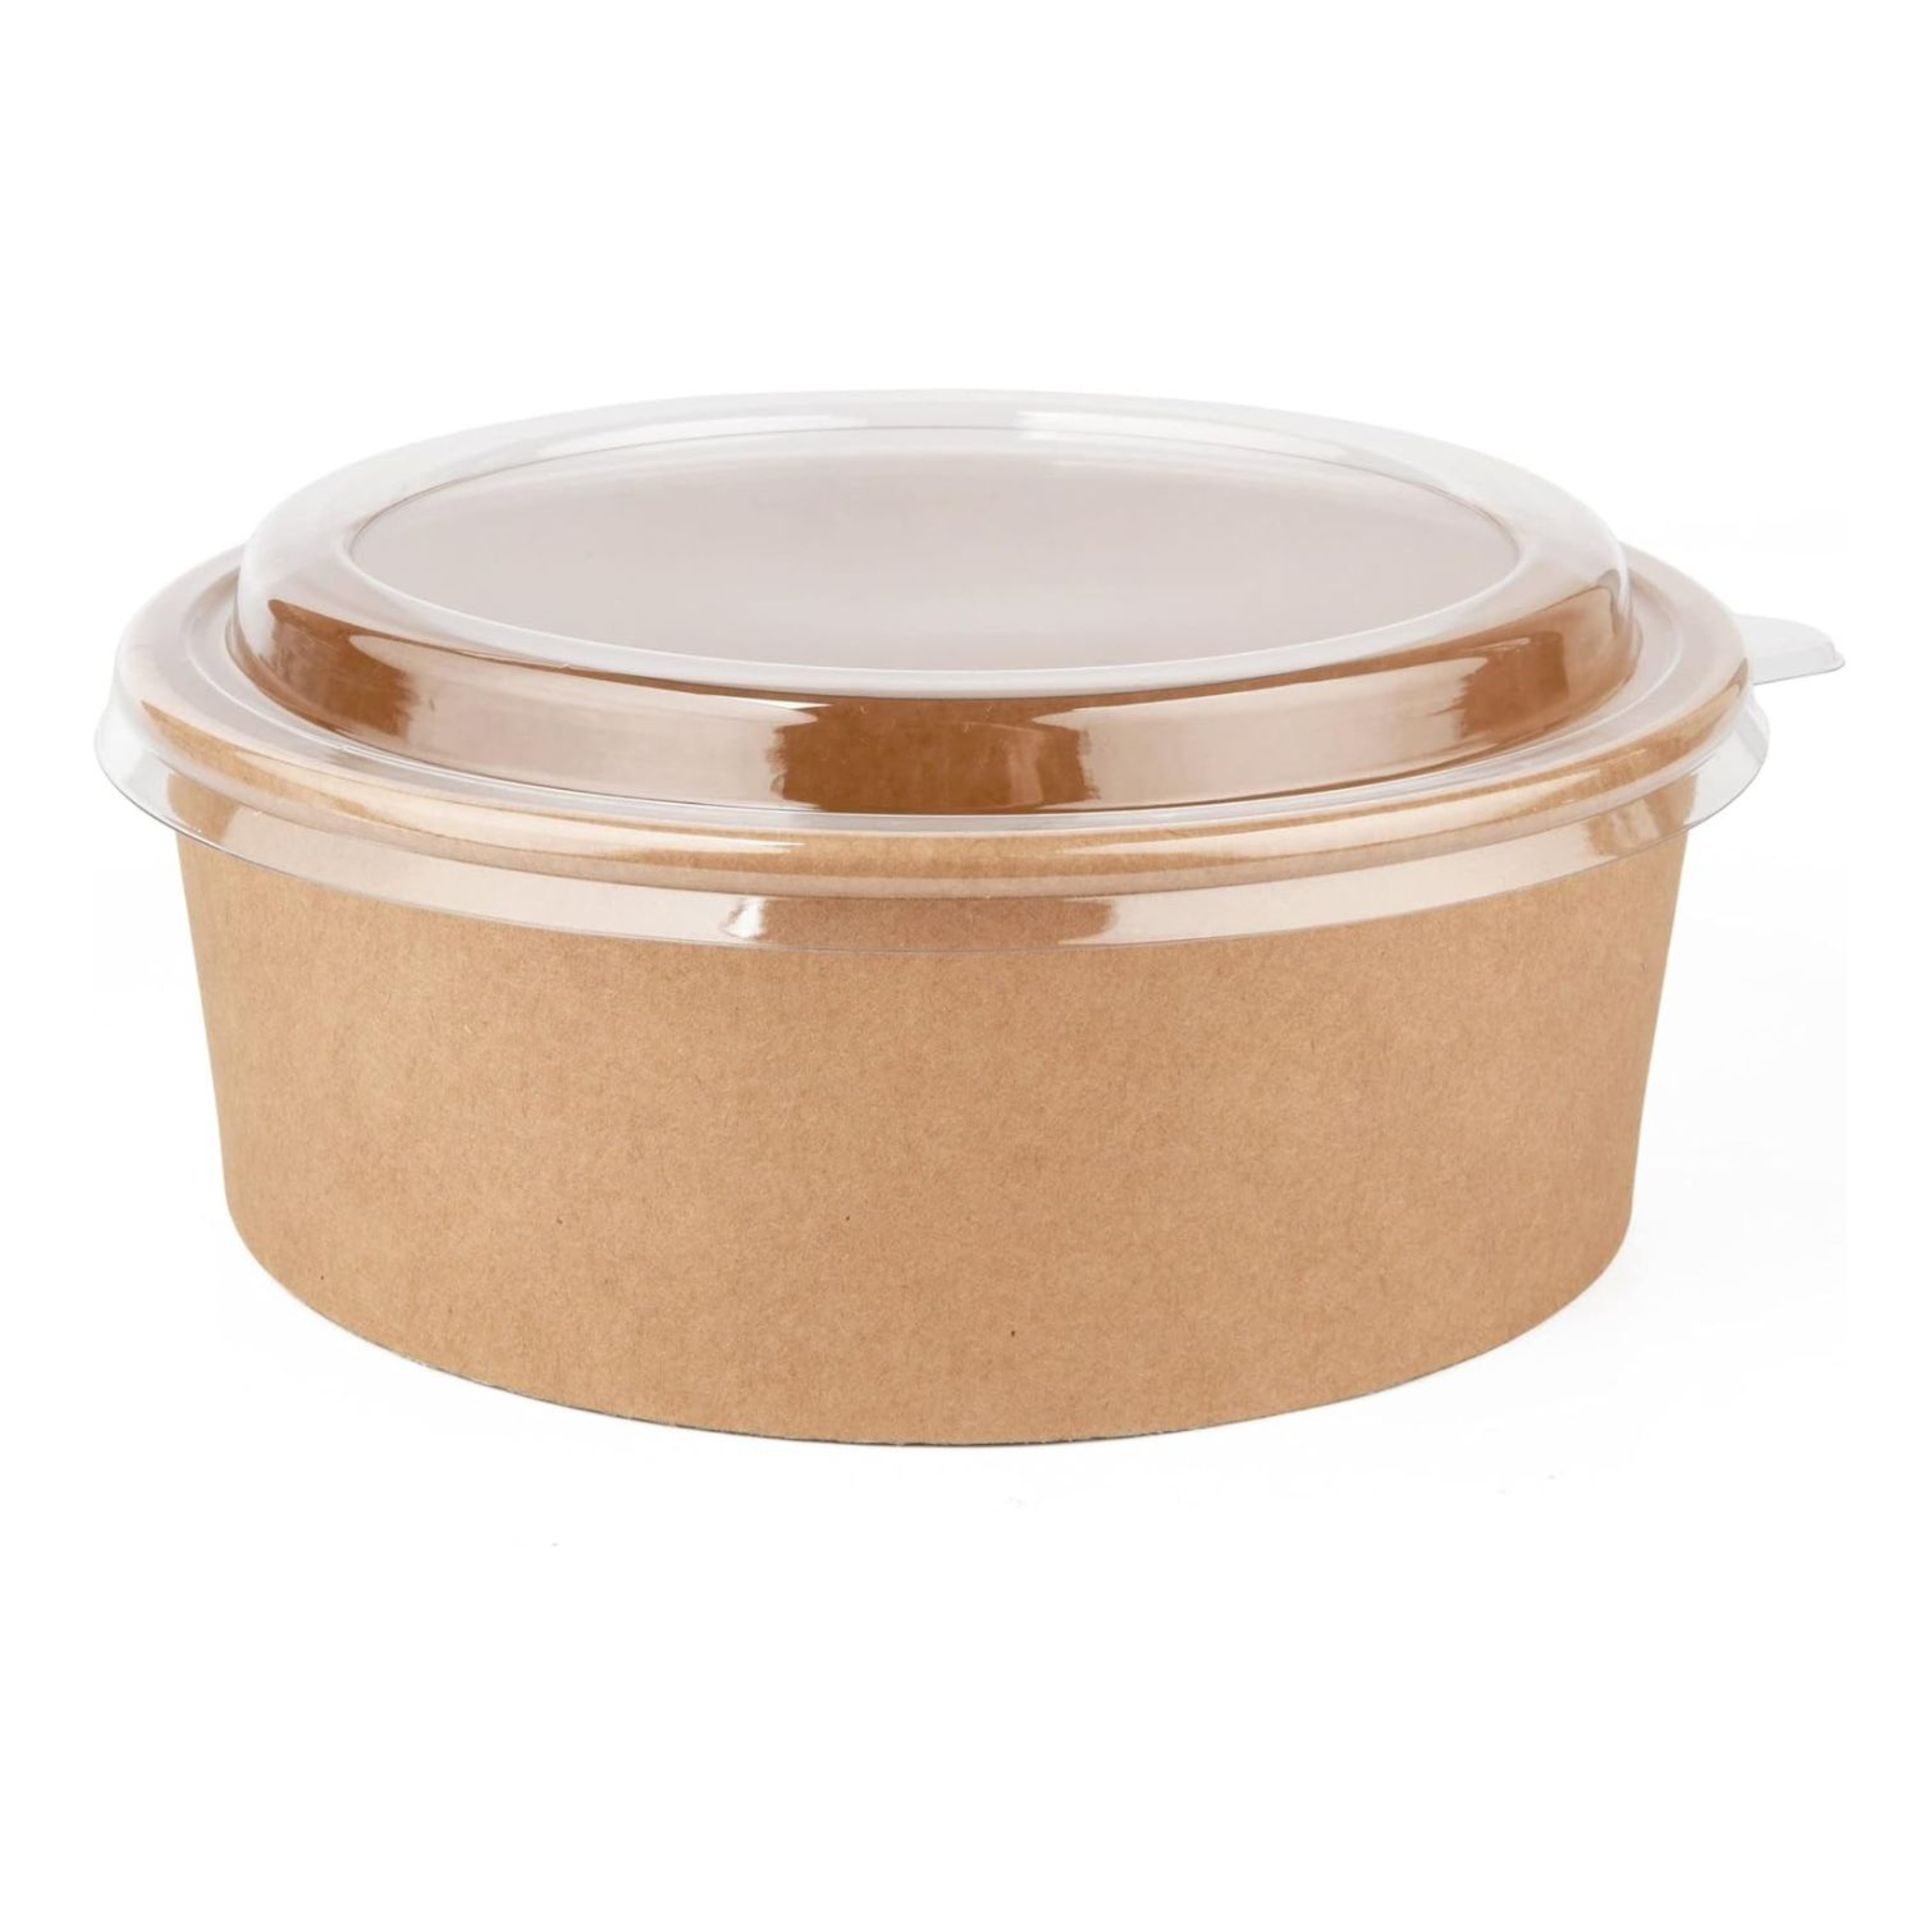 BOX OF 300 KRAFT TAKEAWAY ROUND SALAD BOWLS AND LIDS, SUPER LIGHT WEIGHT, 750 ML - Image 2 of 5